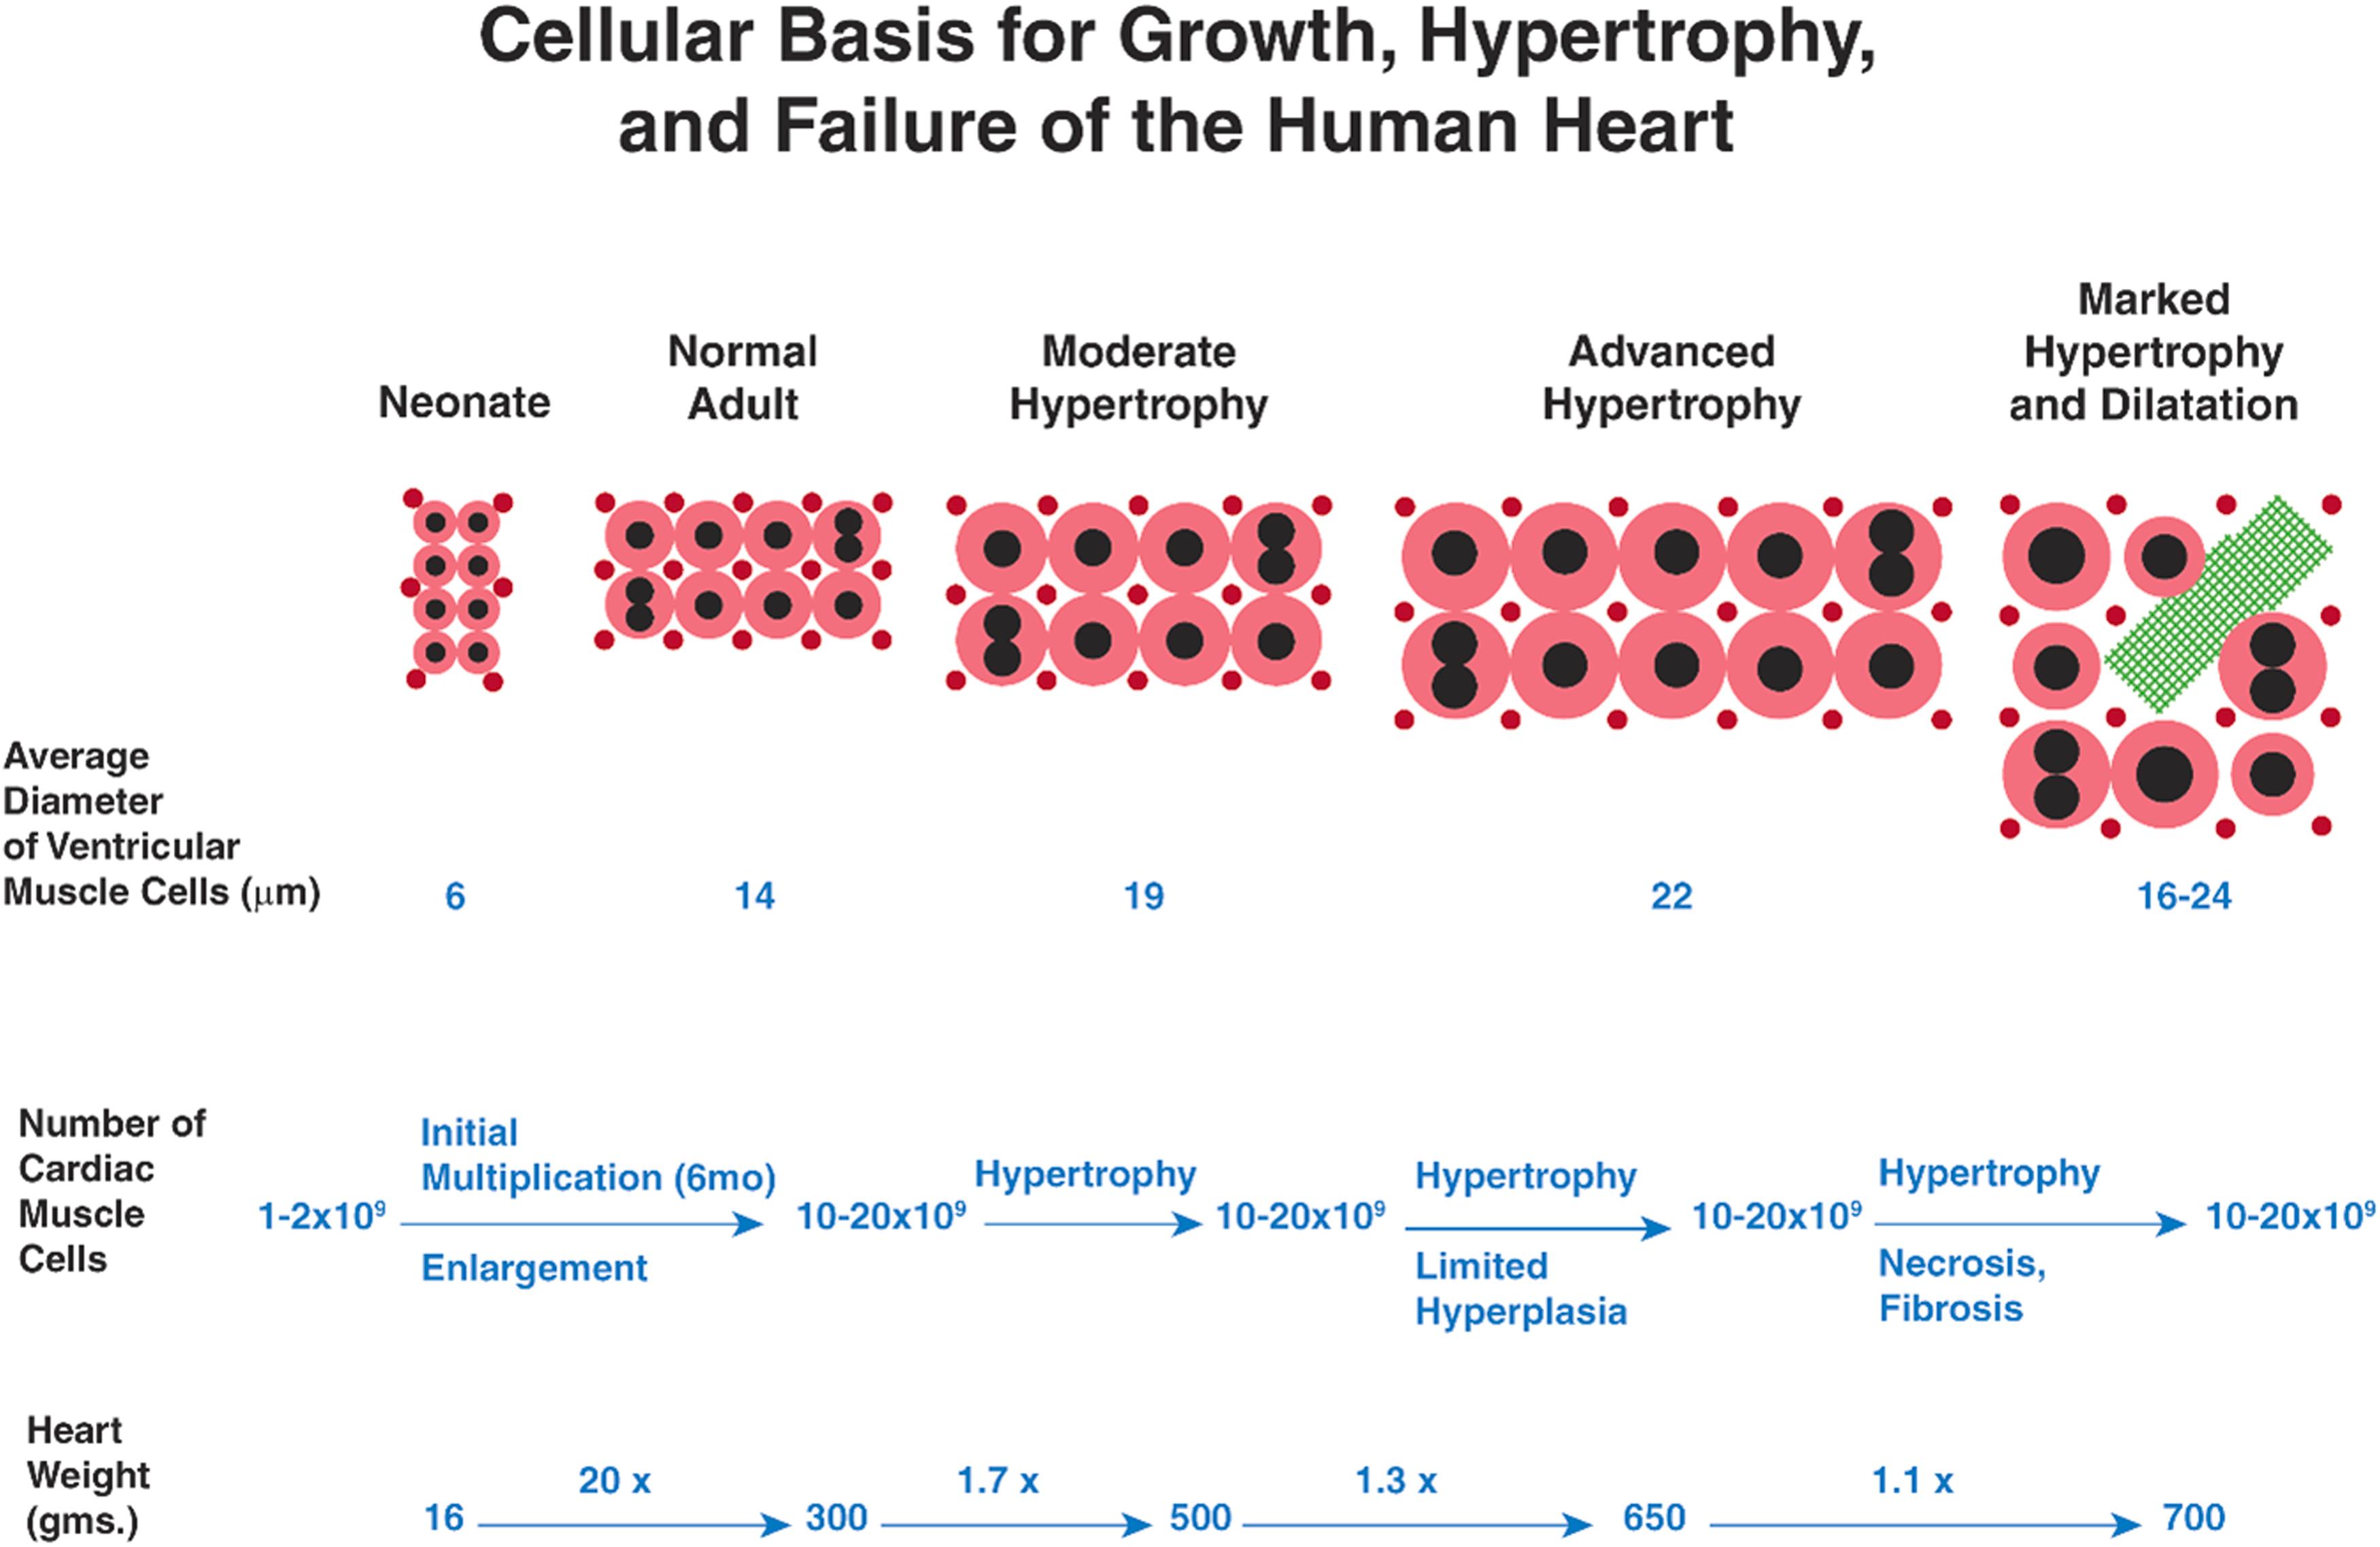 Figure 21.3, Cellular basis for growth, hypertrophy, and failure of the human heart. Cellular basis for growth, hypertrophy, and failure of the human heart. This figure depicts various stages in the growth of the myocardium and the myocardial response to chronic stress, based on morphometric data. After an initial phase of simultaneous multiplication and enlargement of cardiomyocytes in the fetus and in the first few months of neonatal life, subsequent development of the adult heart occurs by enlargement of existing cardiomyocytes coupled with proliferation of the capillary network. The one-to-one ratio of cardiomyocytes to capillaries is maintained thereafter. In response to stress, the heart mass increases by hypertrophic enlargement of existing cardiomyocytes associated with polyploidy of nuclear DNA and formation of increased numbers of binucleated cardiomyocytes. Once a critical heart weight of 500 g (200 g left ventricular weight) is exceeded, there is continued hypertrophy of existing myocytes plus apparent formation of new myocytes (hyperplasia), based on morphometric analysis. Further hypertrophy exceeds coronary vascular reserve with subsequent cardiomyocyte necrosis, rearrangement of cardiomyocytes, fibrosis, and structural dilation of the chambers of the decompensated, failing heart.